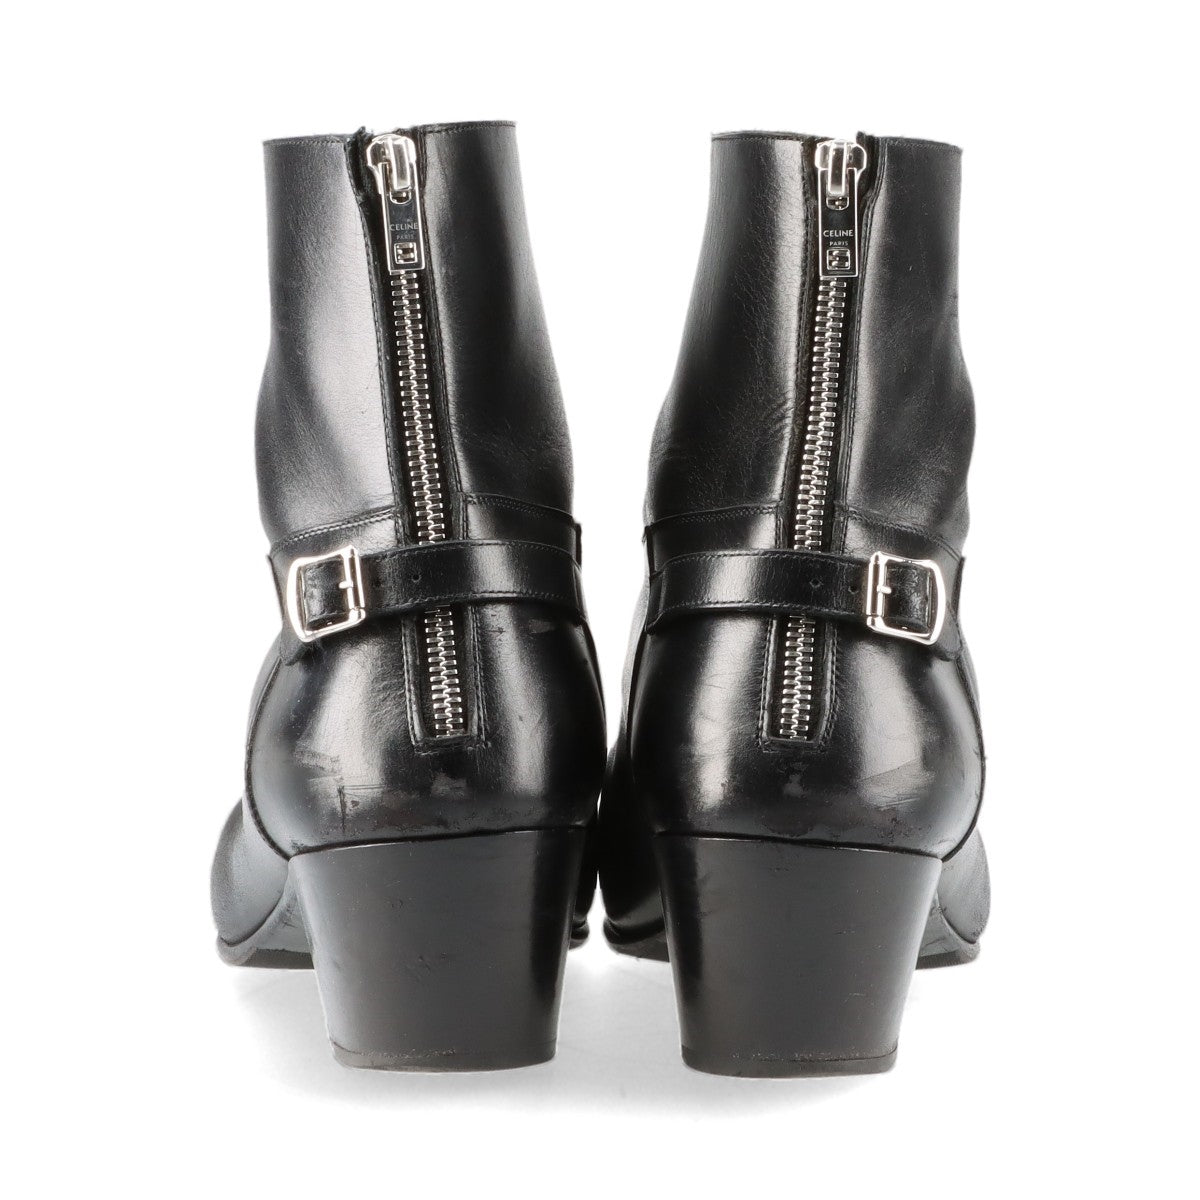 Celine Leather Short Boots EU40 Ladies' Black MG0291 Box There is a bag